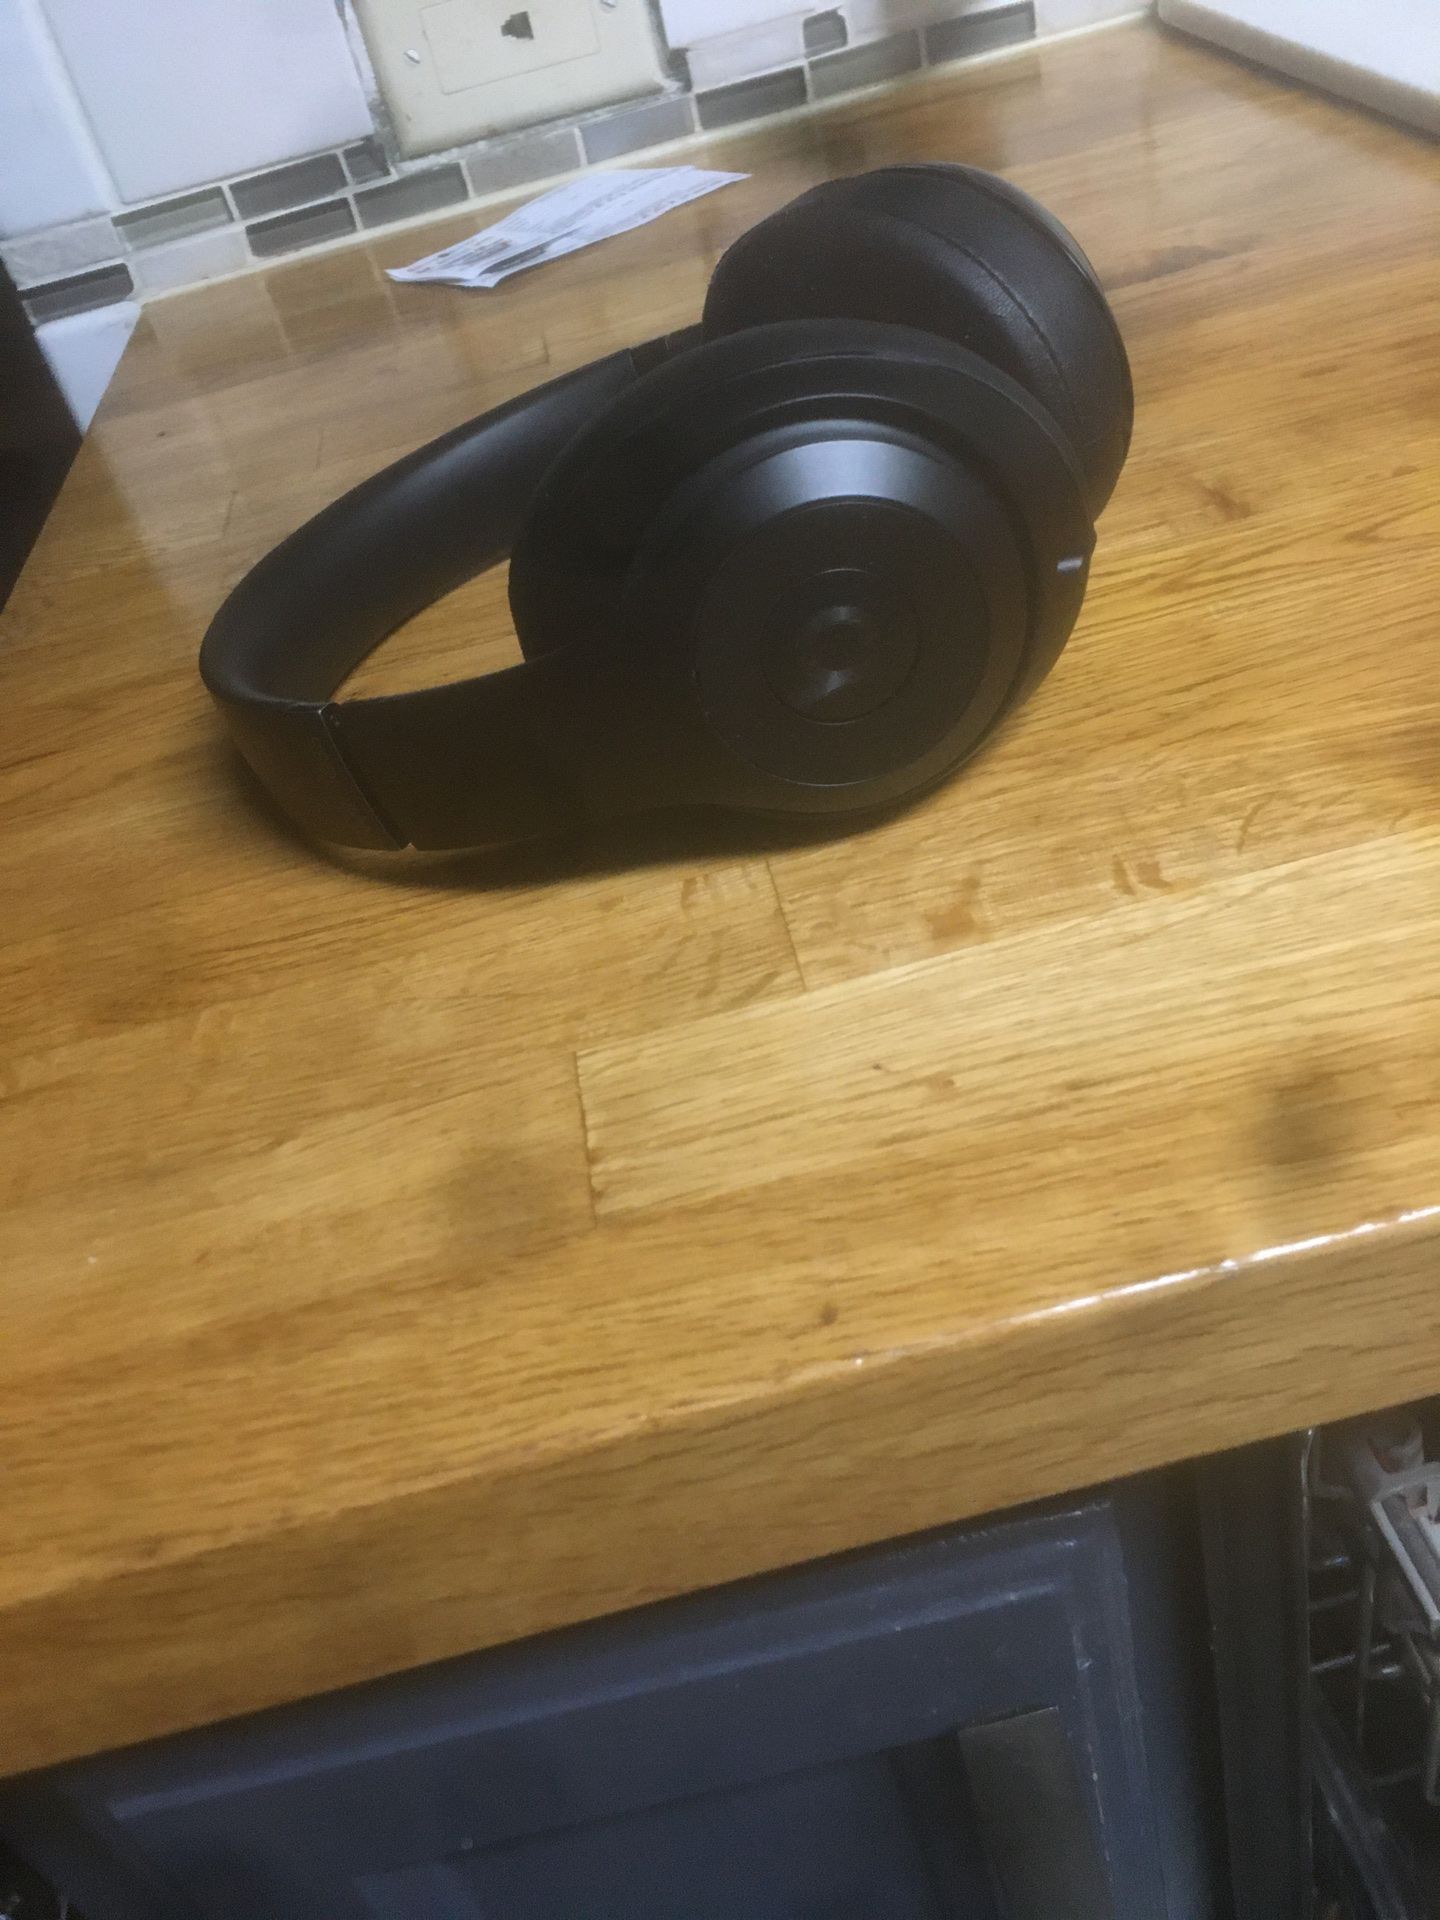 Beats Wireless headphones (with charger)